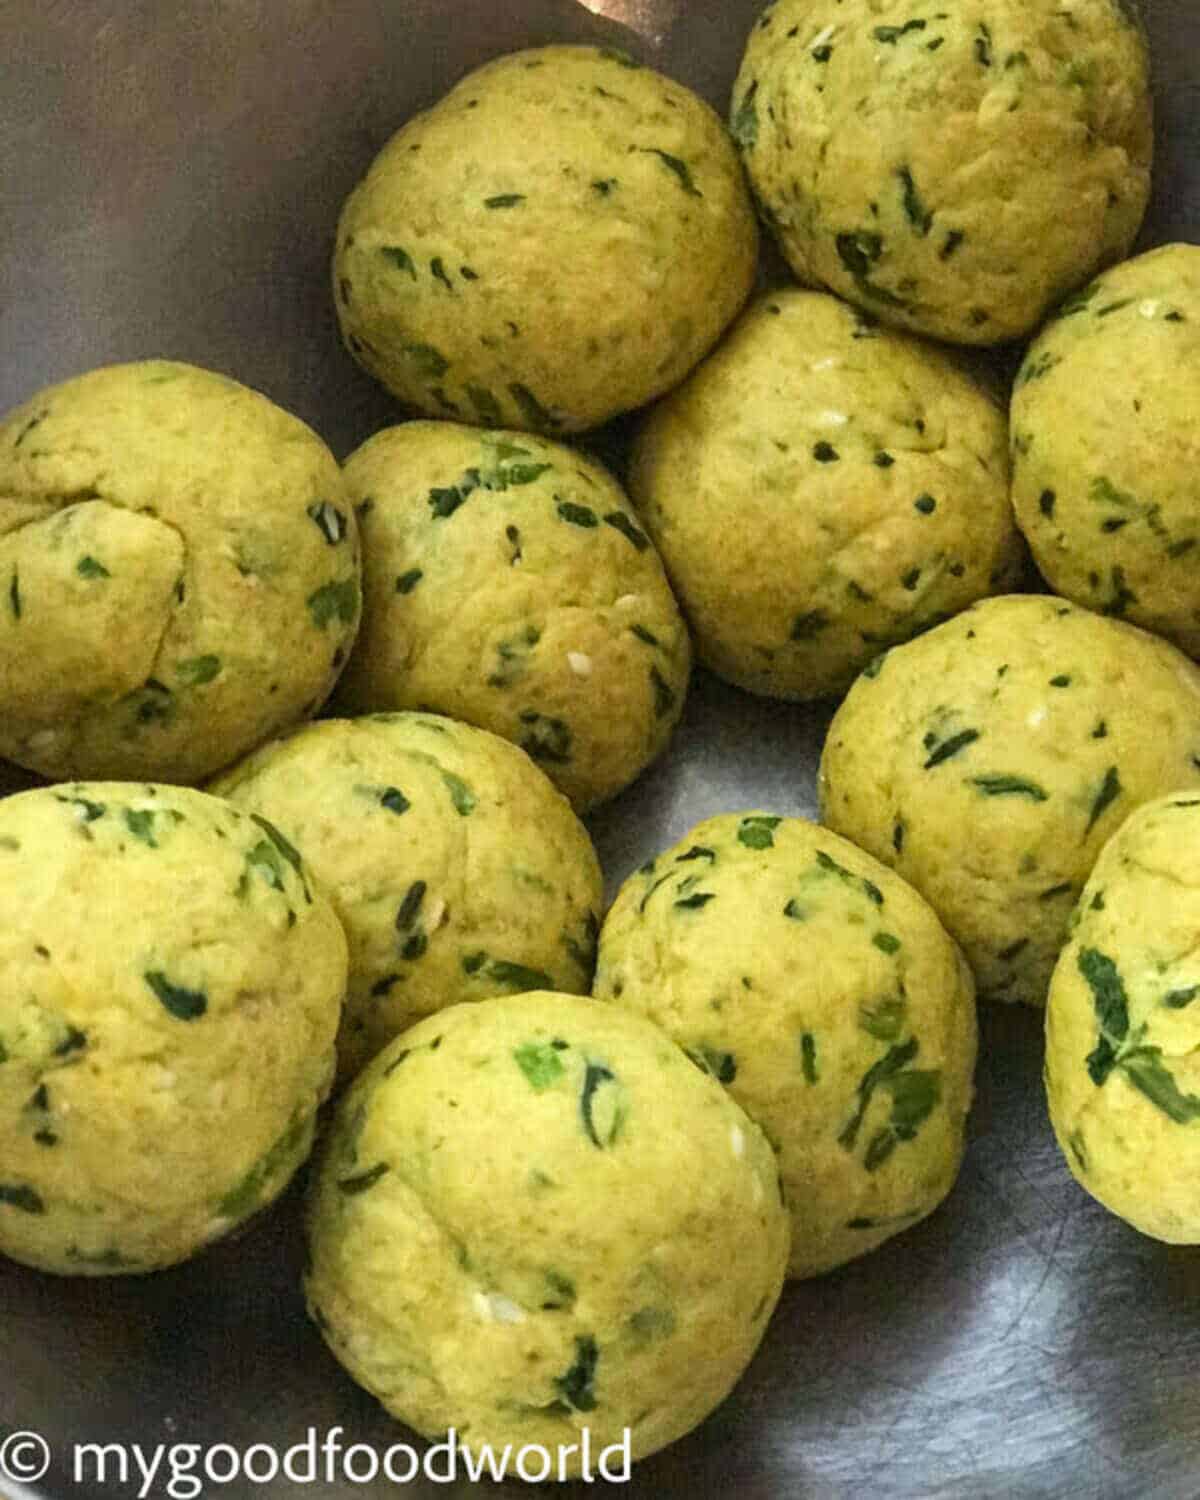 Turmeric roti dough balls placed together on a steel bowl.